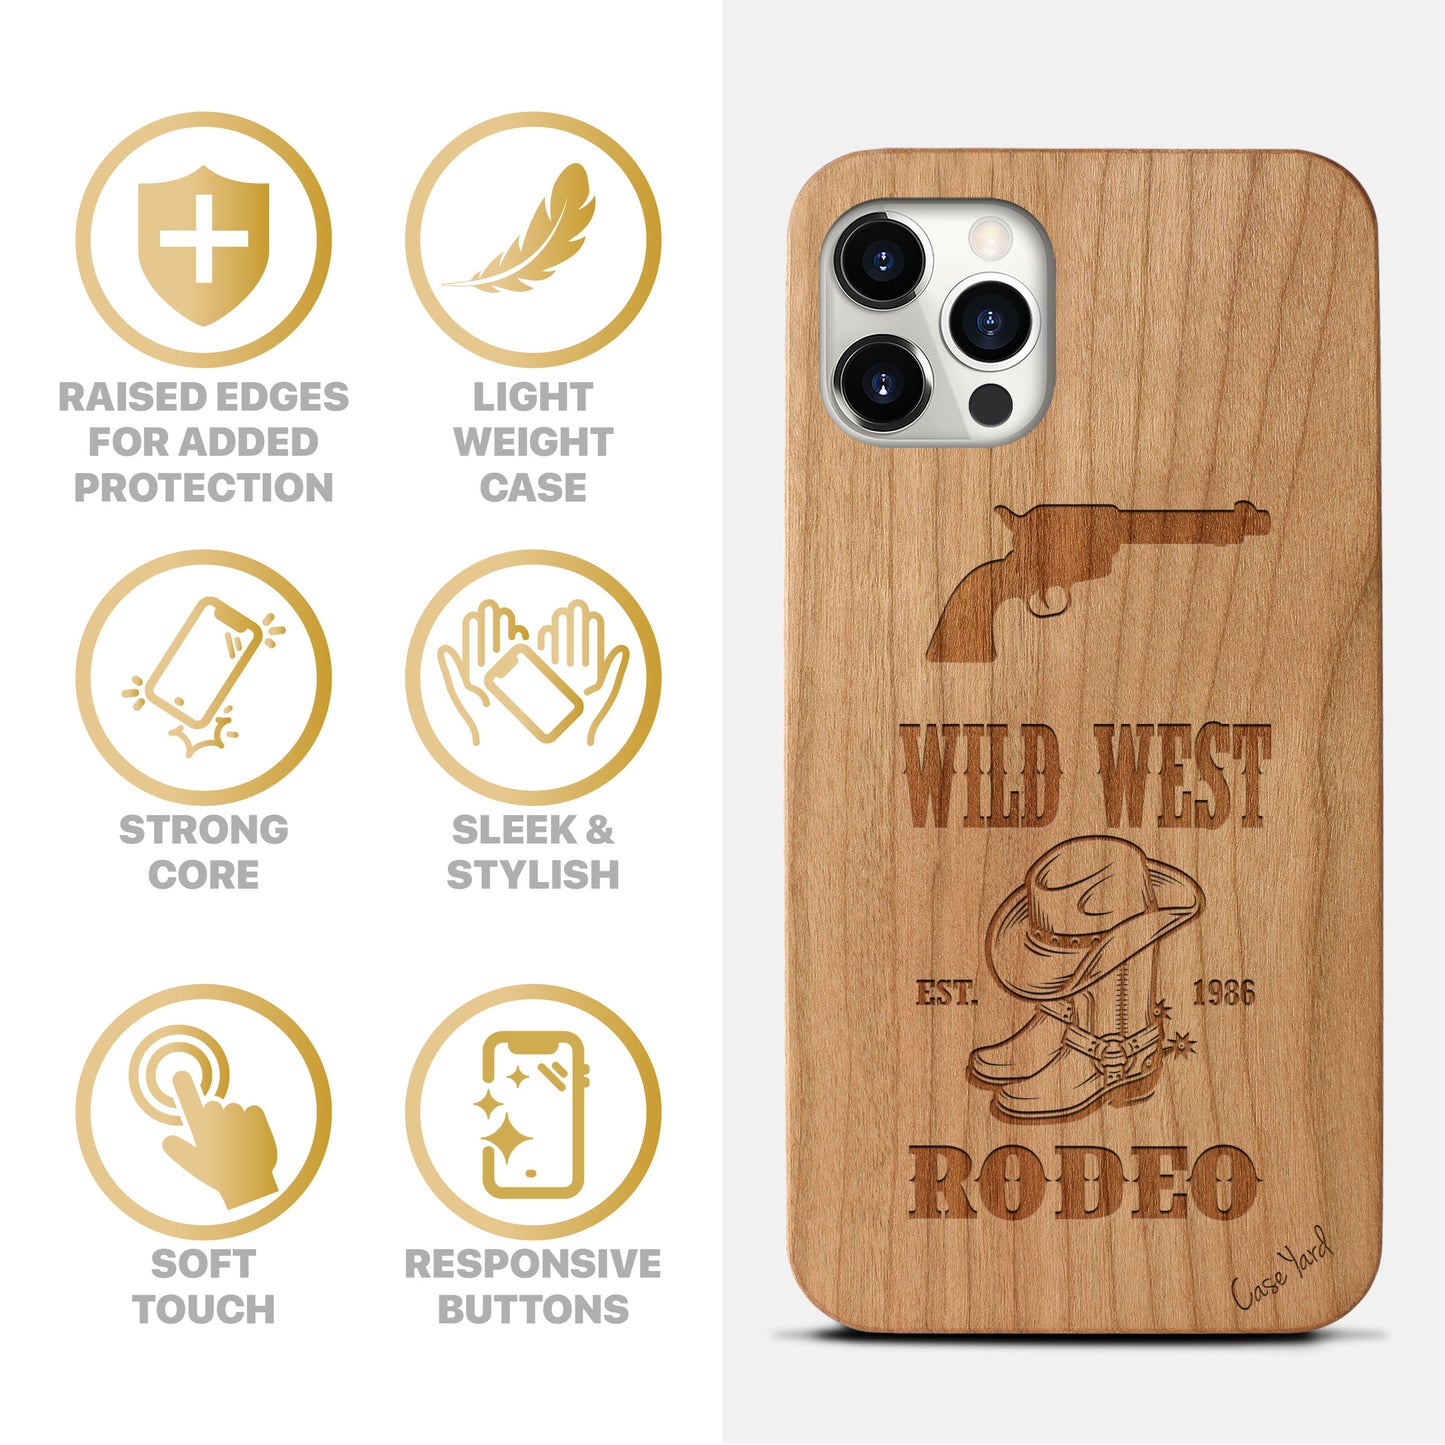 Wooden Cell Phone Case Cover, Laser Engraved case for iPhone & Samsung phone Wild West Rodeo Design